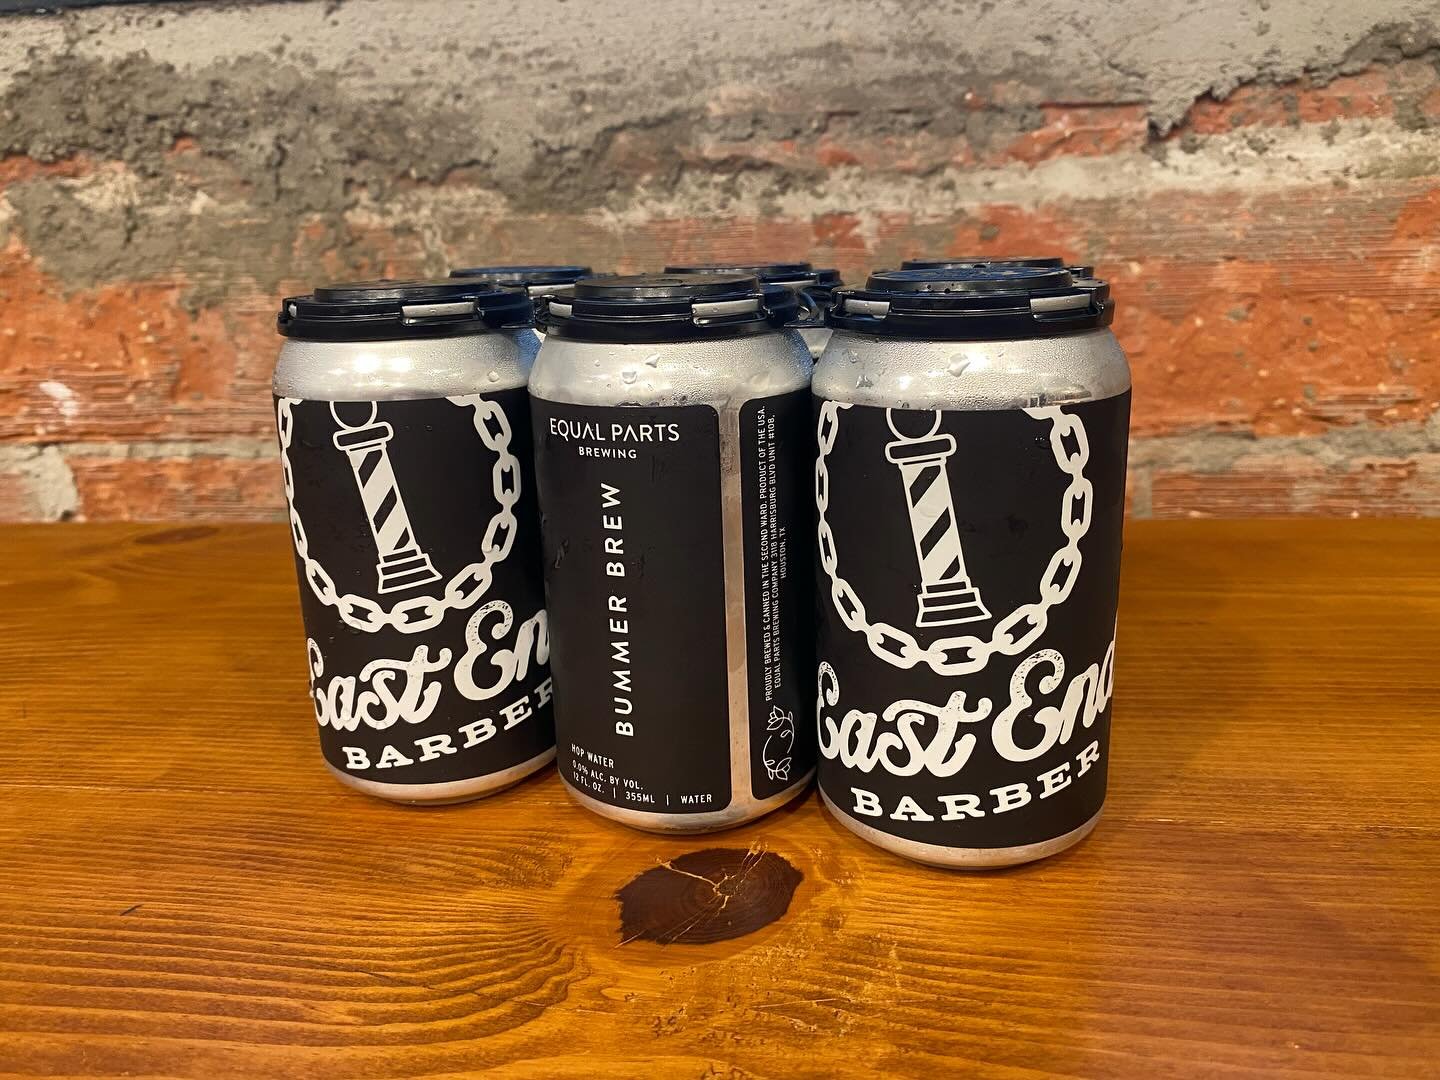 @eastendbarber x @equalpartsbrewing non alcoholic hop water aka the bummer brew 💥 available this saturday at our anniversary pop up 
#houstonbarber #barber #barbershopconnect #houston #texasbarber #barberlife #barbershop #rockets #houstonbarbers #ha